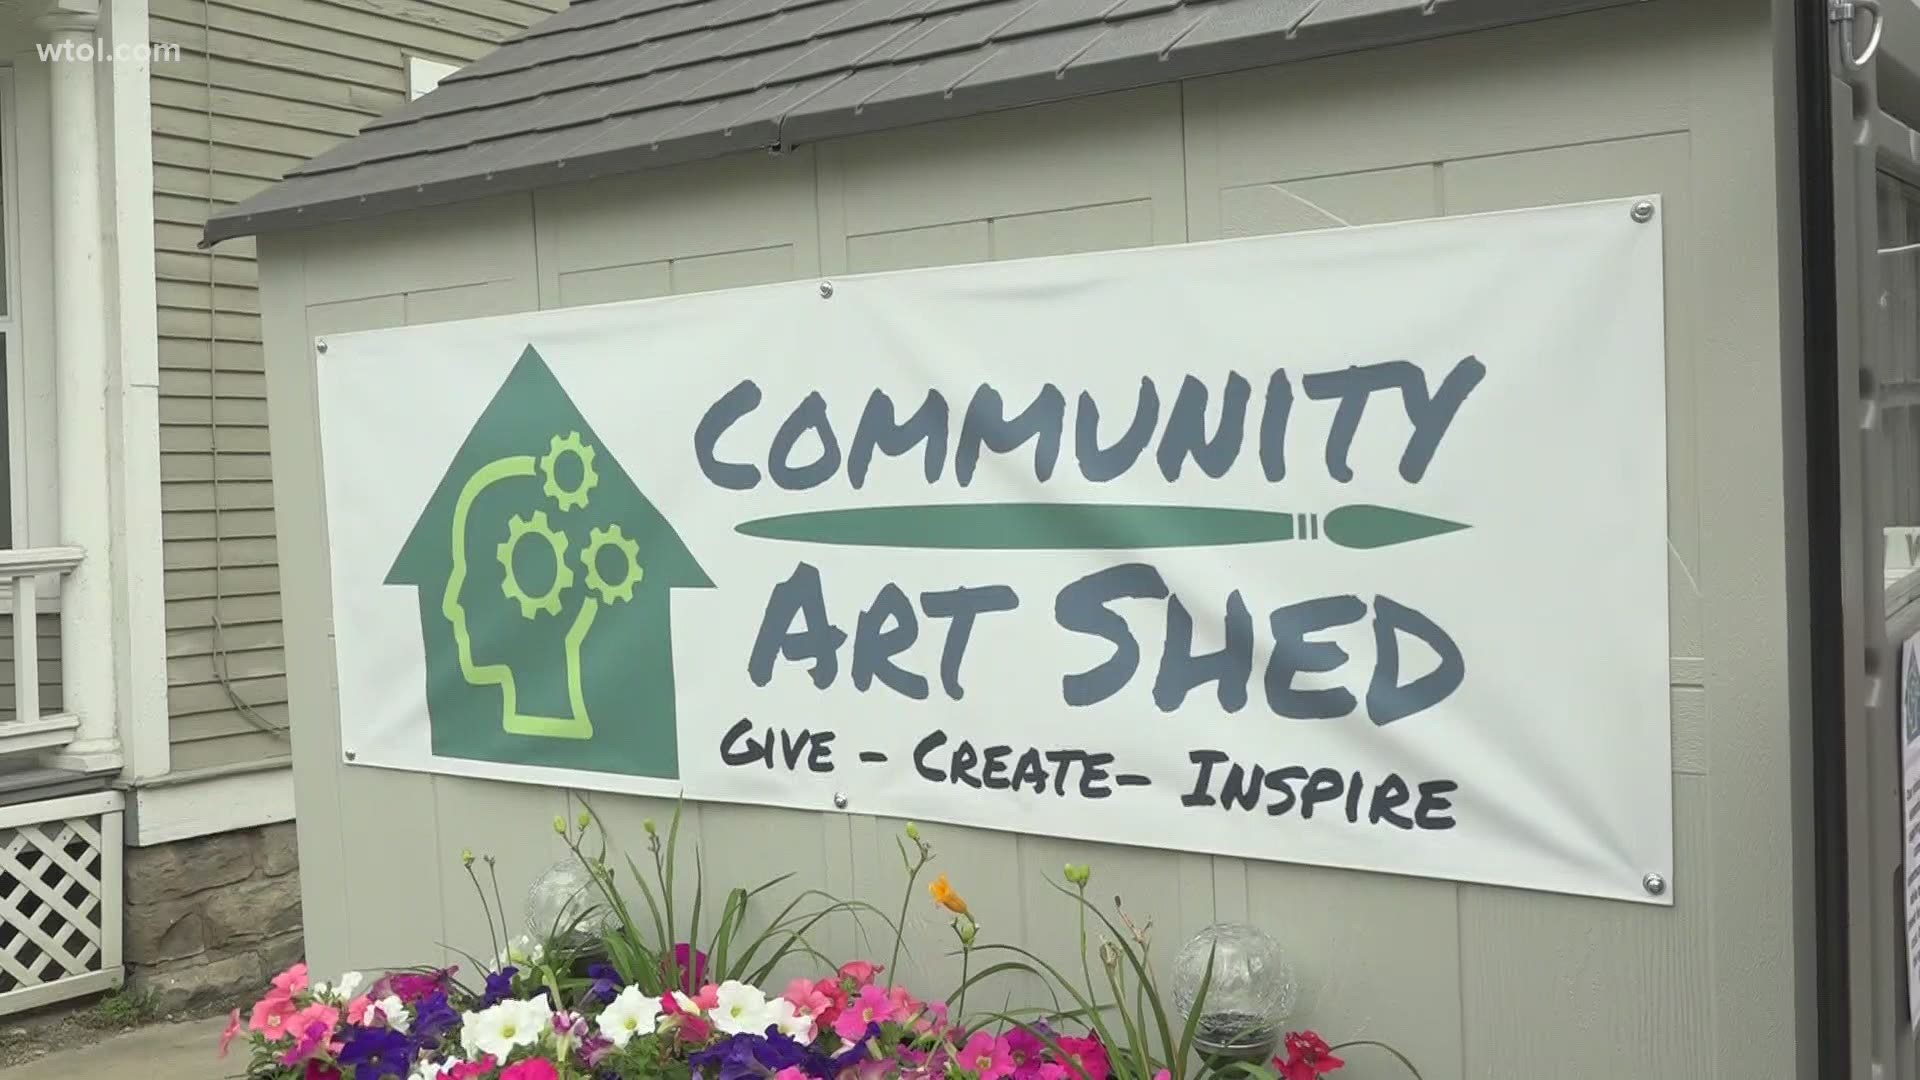 The project expanded on the idea of a "Little Free Library" and now offers donated art supplies for free to the community.